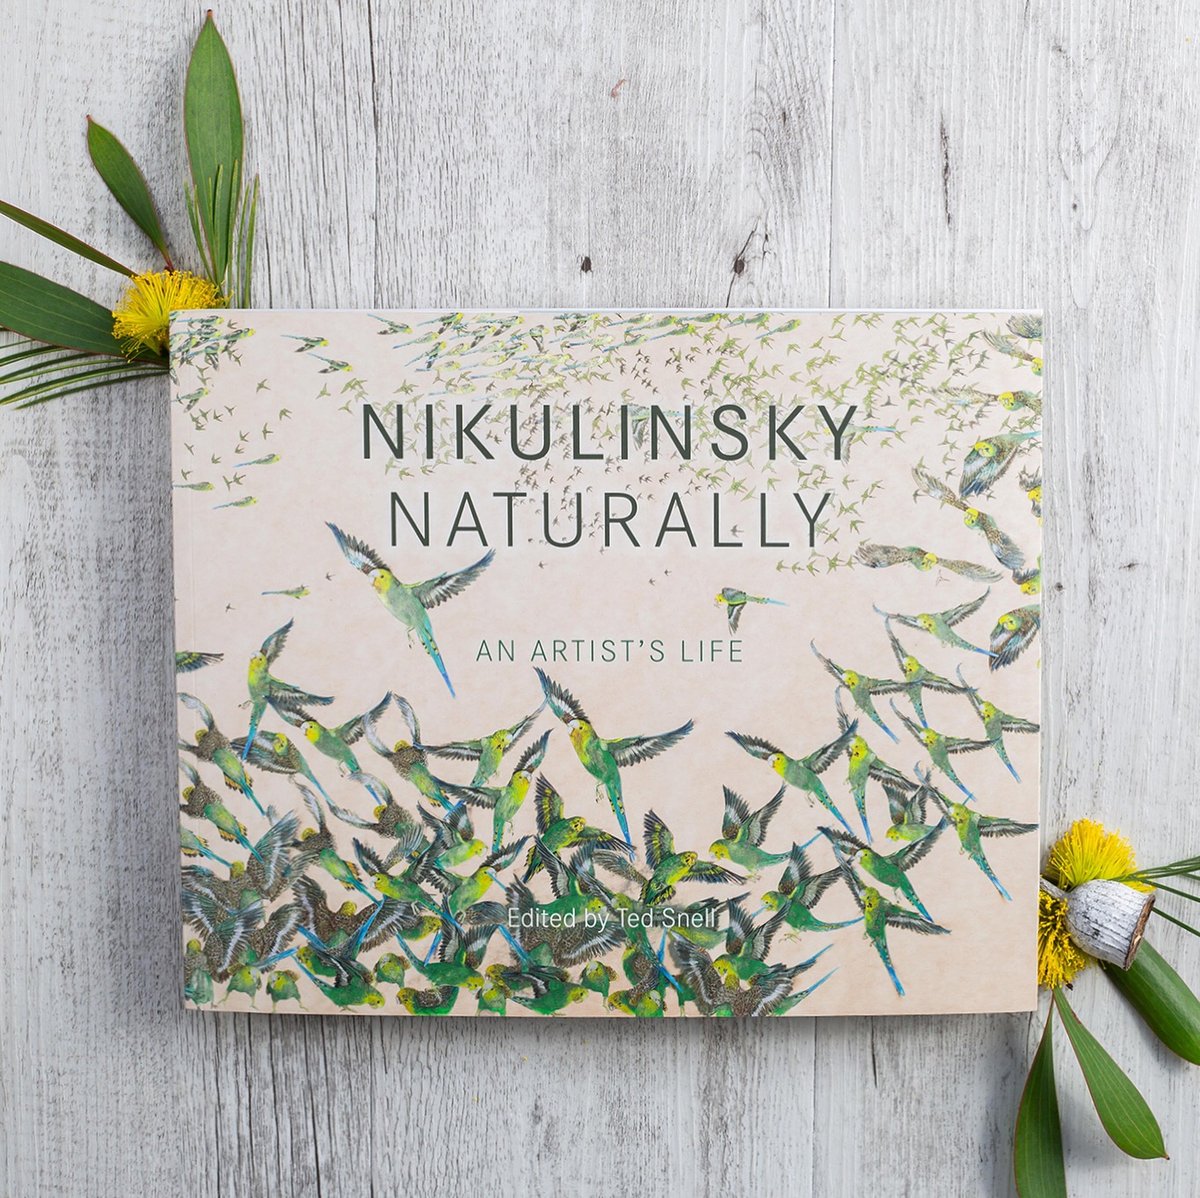 Illustrator Philippa Nukulinsky joins us to talk about her latest book: Nikulinsky Naturally